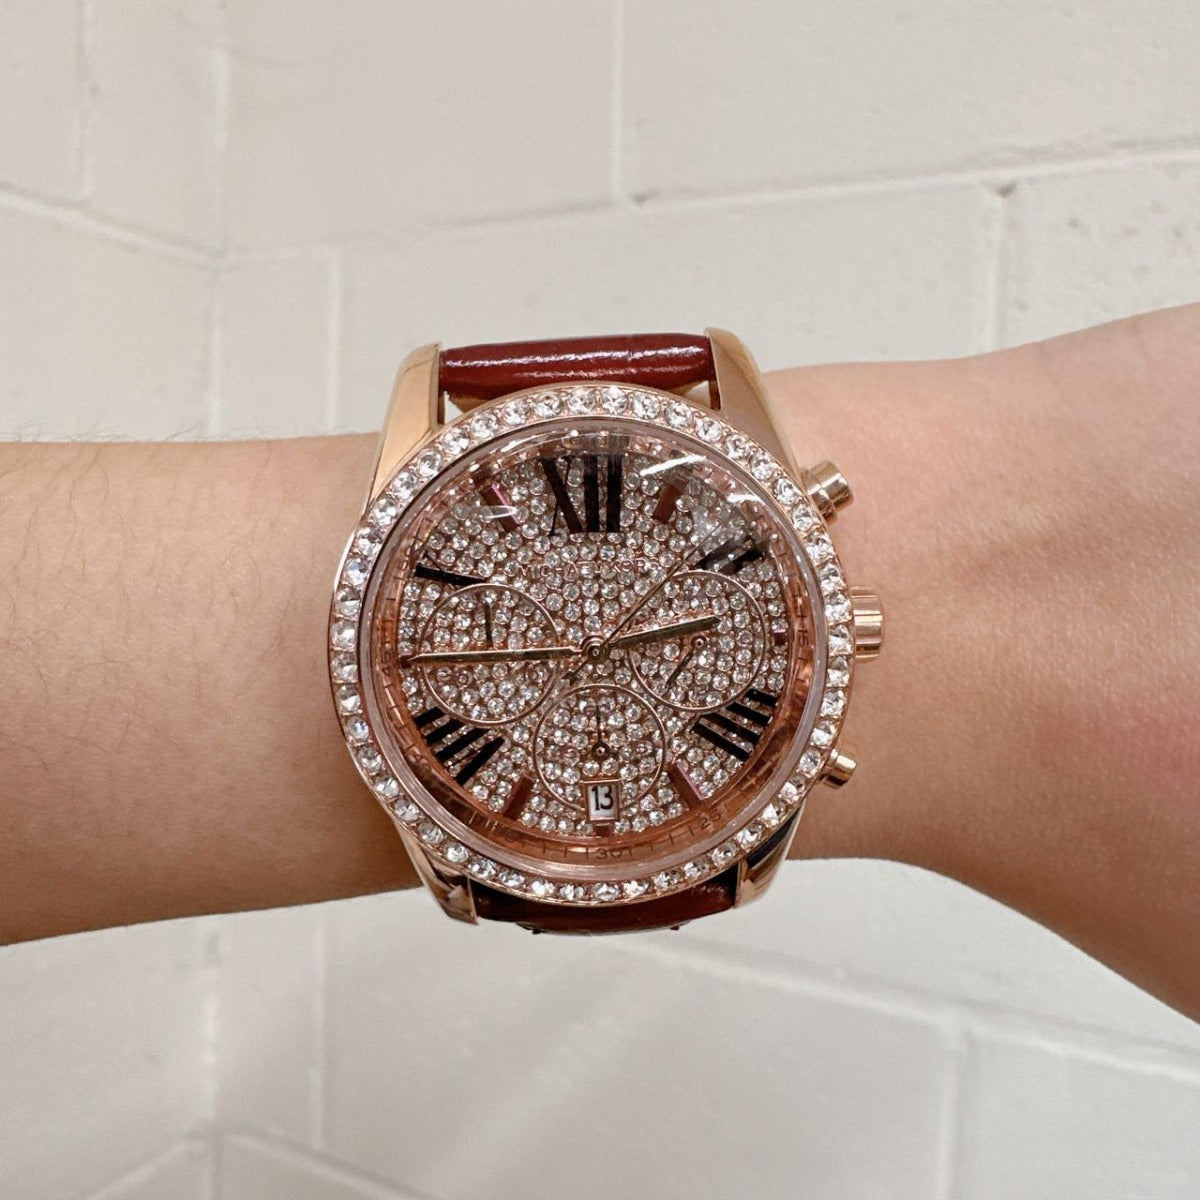 Michael Kors MK2971 Lexington Pave Rose Gold Tone and Crocodile Embossed Leather Watch - 796483577282